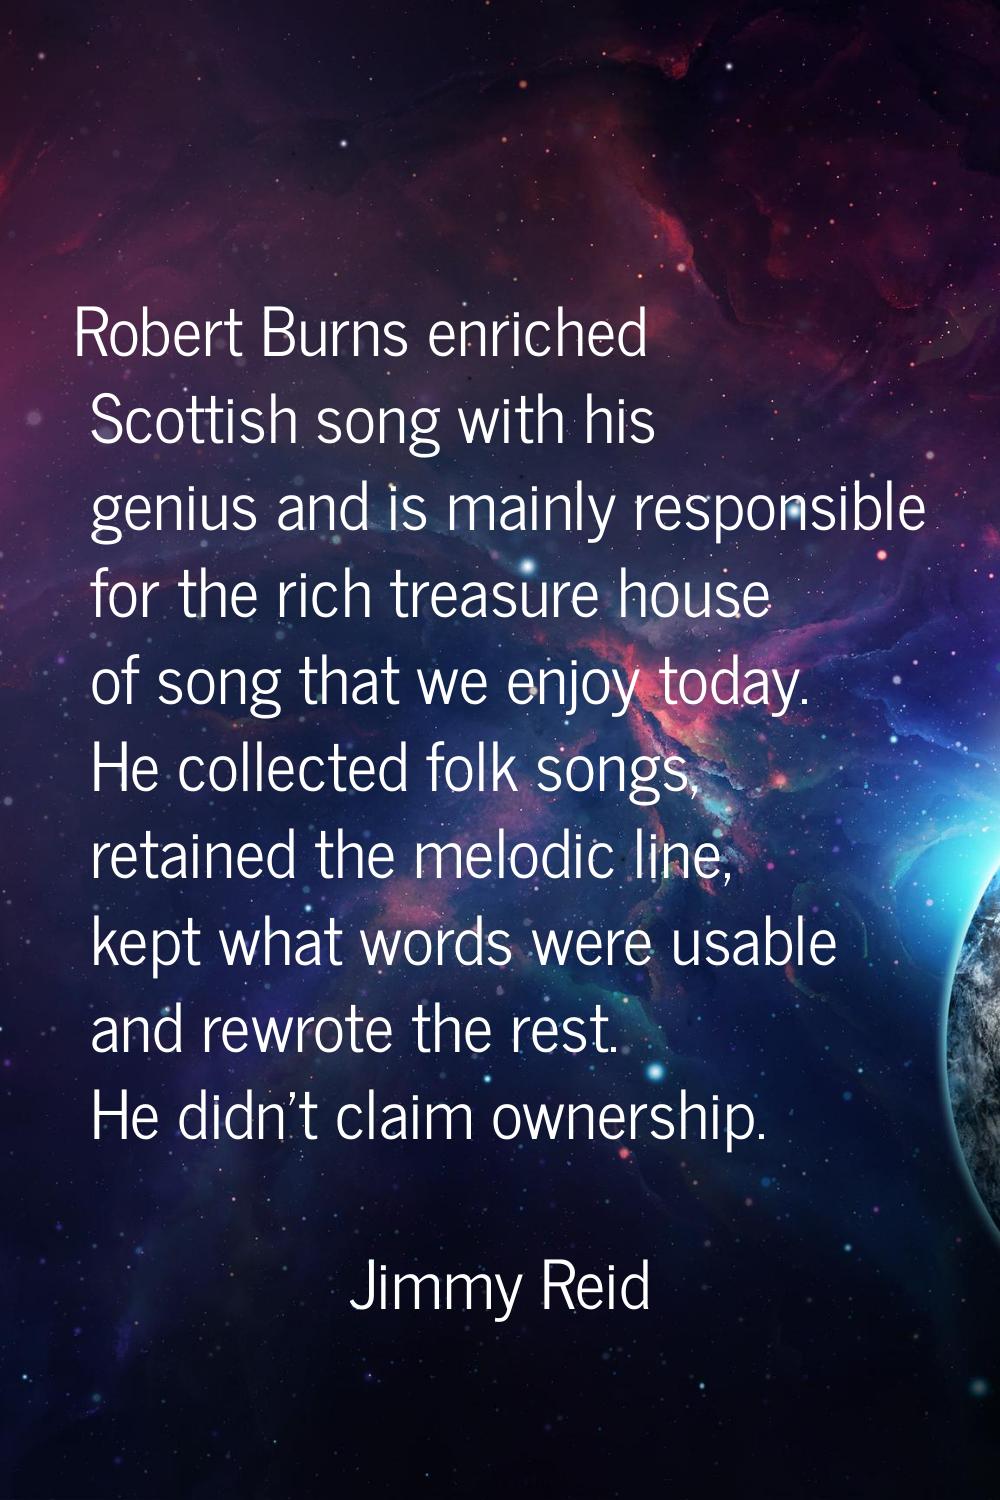 Robert Burns enriched Scottish song with his genius and is mainly responsible for the rich treasure